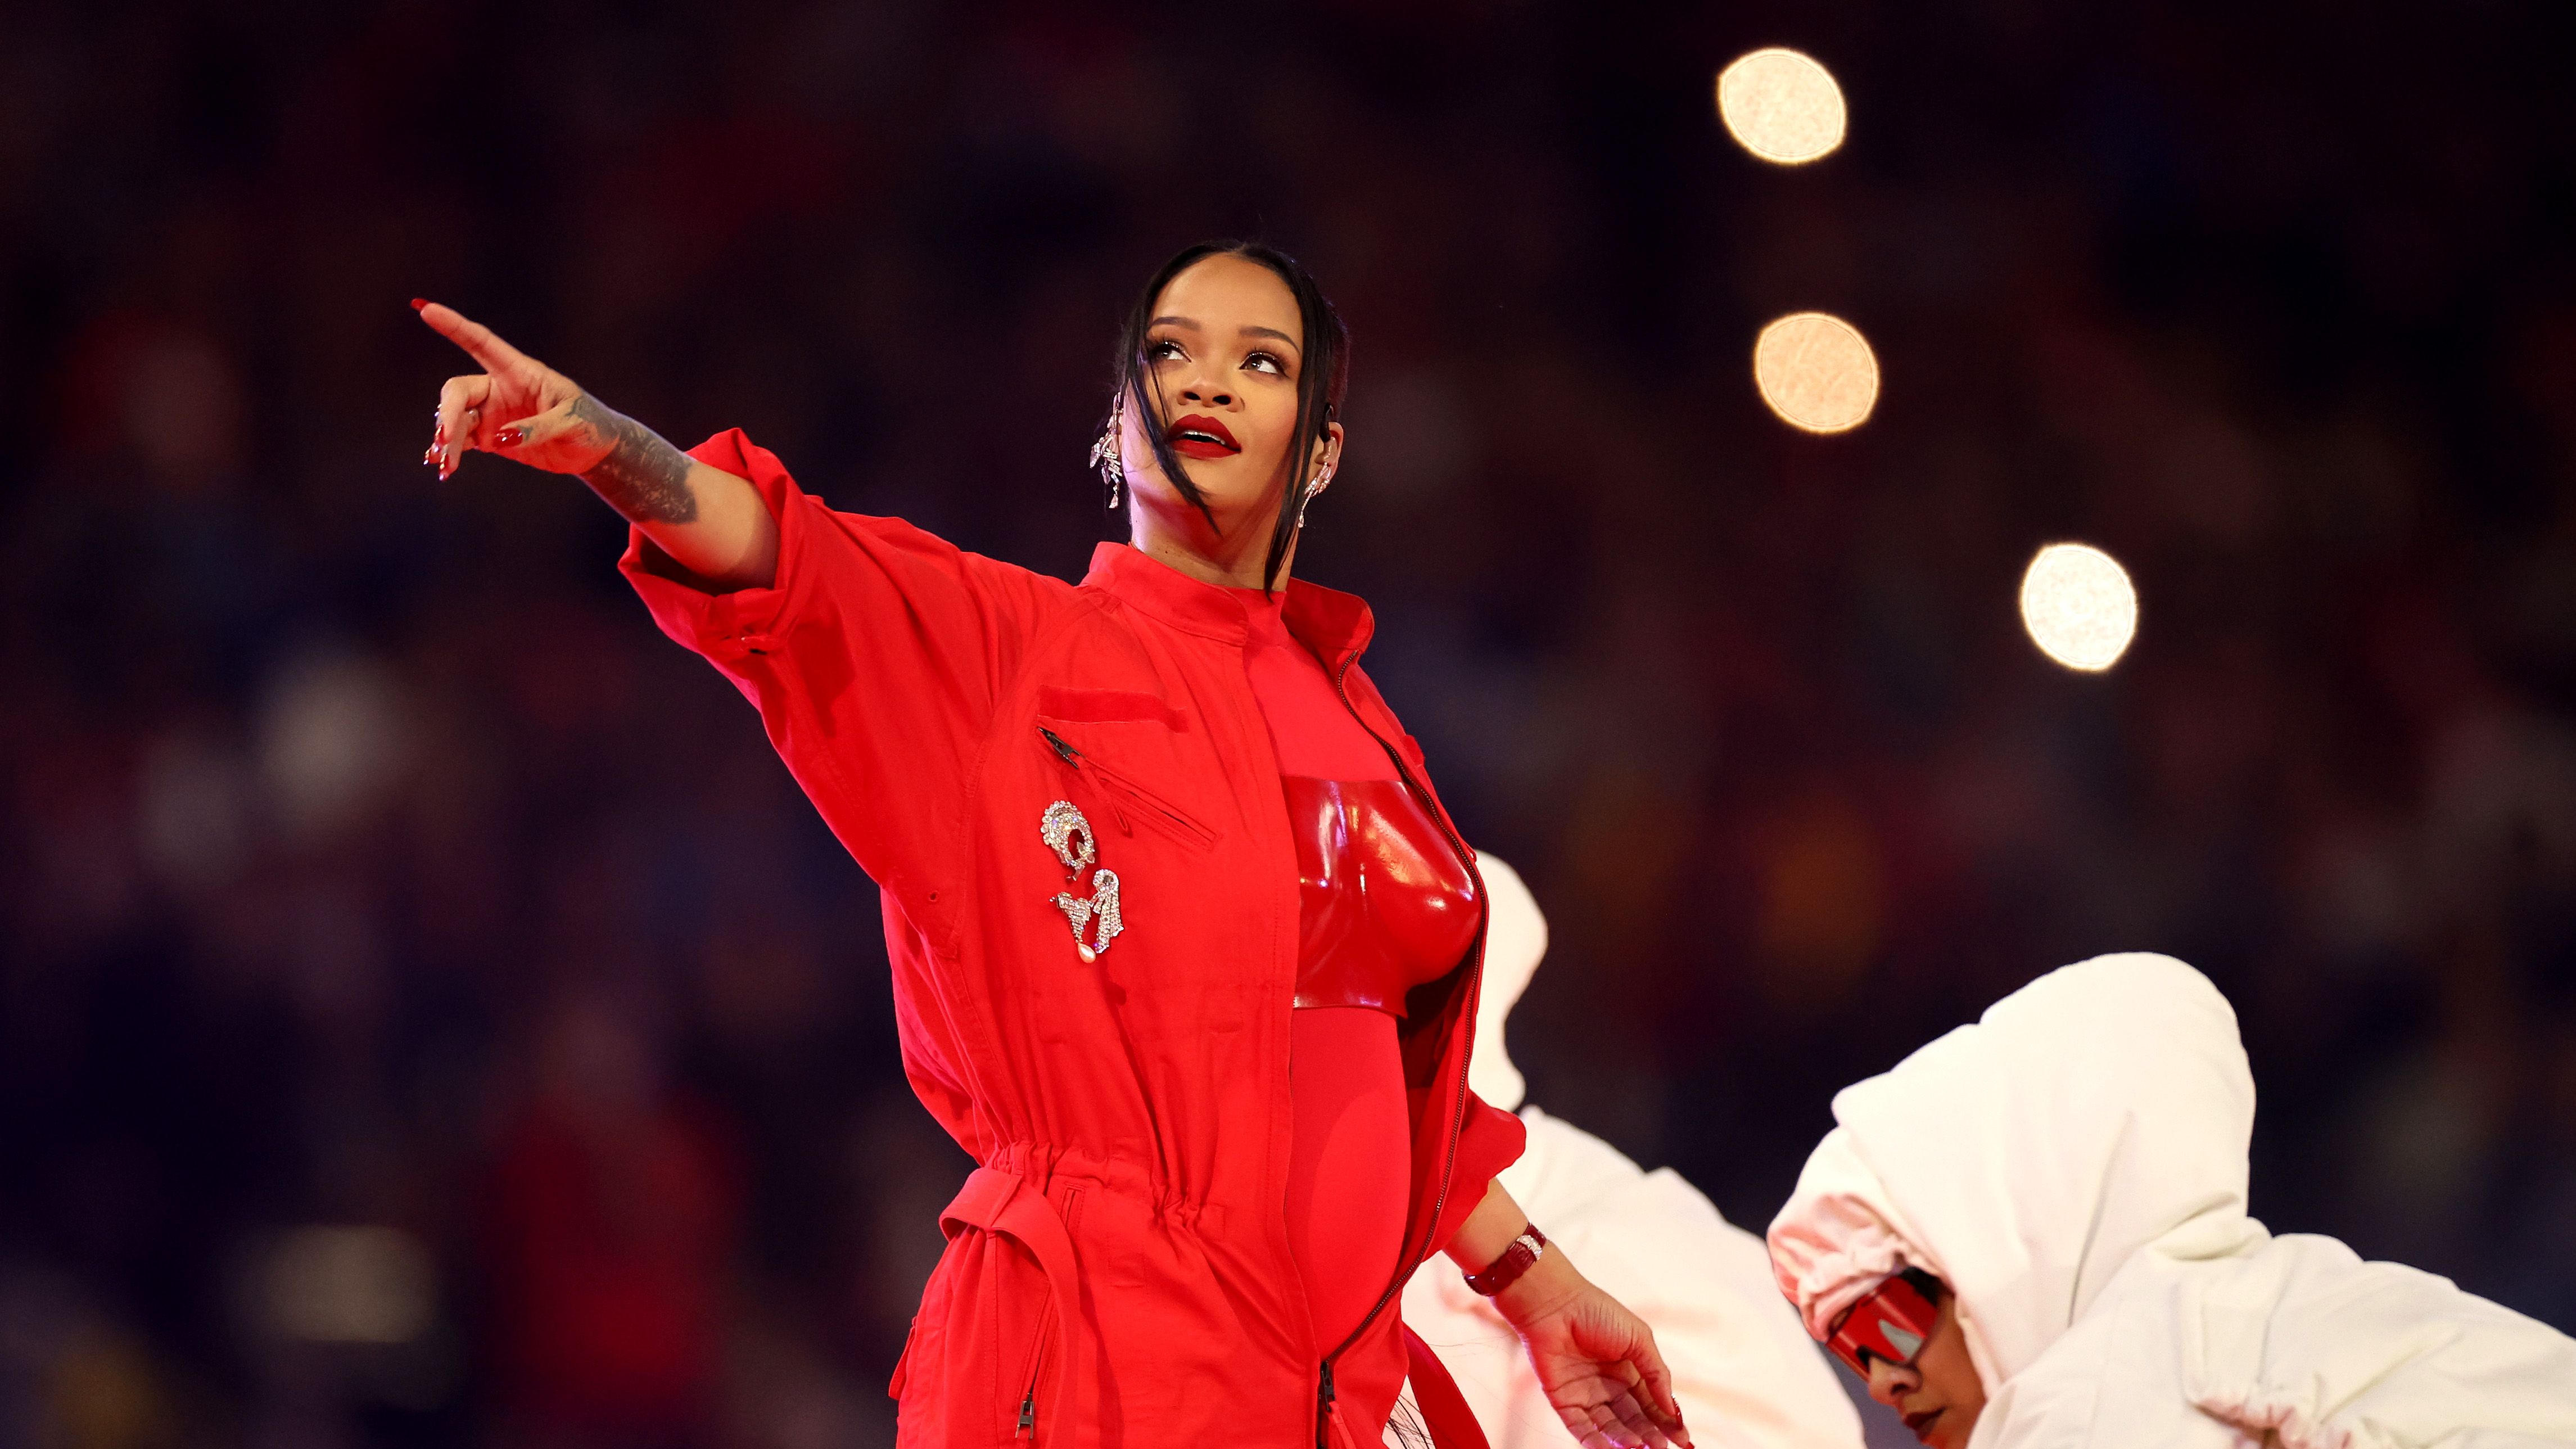 How to watch Rihanna's Super Bowl halftime show: Time, channel